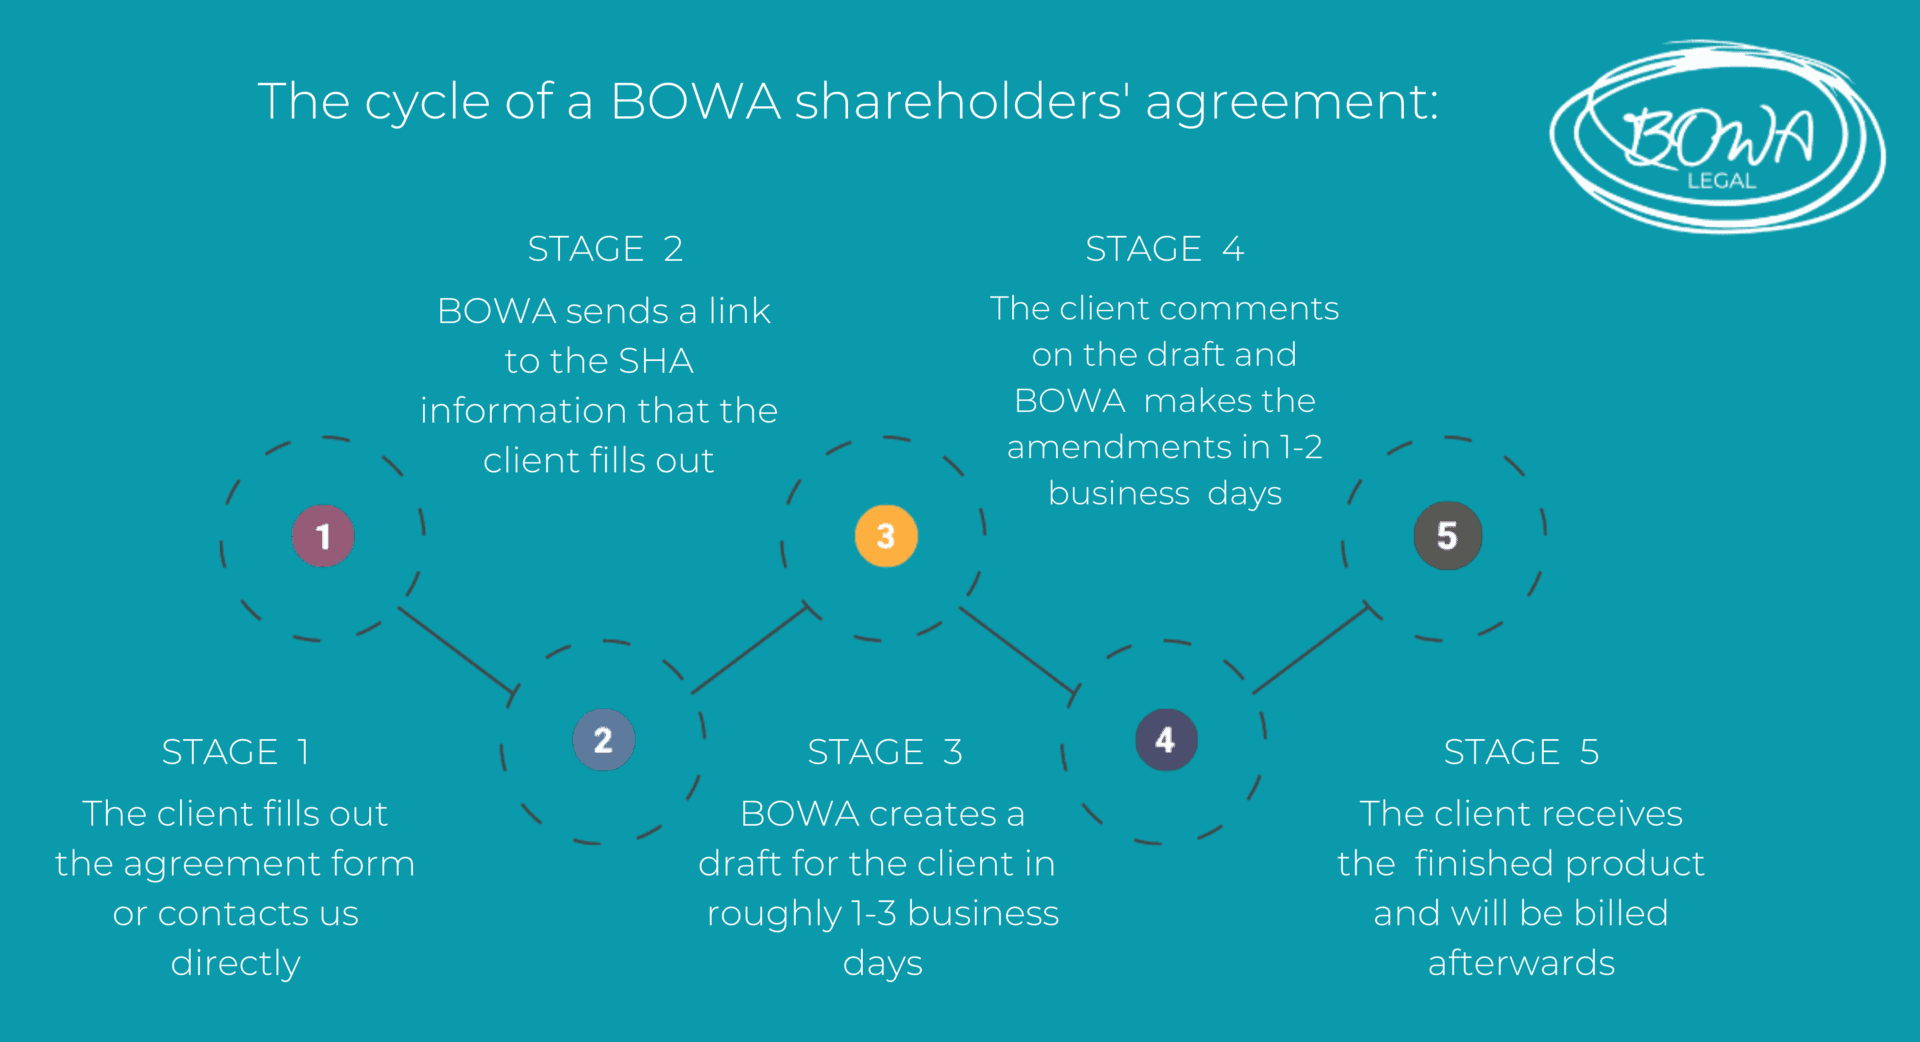 The different stages of the BOWA Shareholders' agreement drafting process.